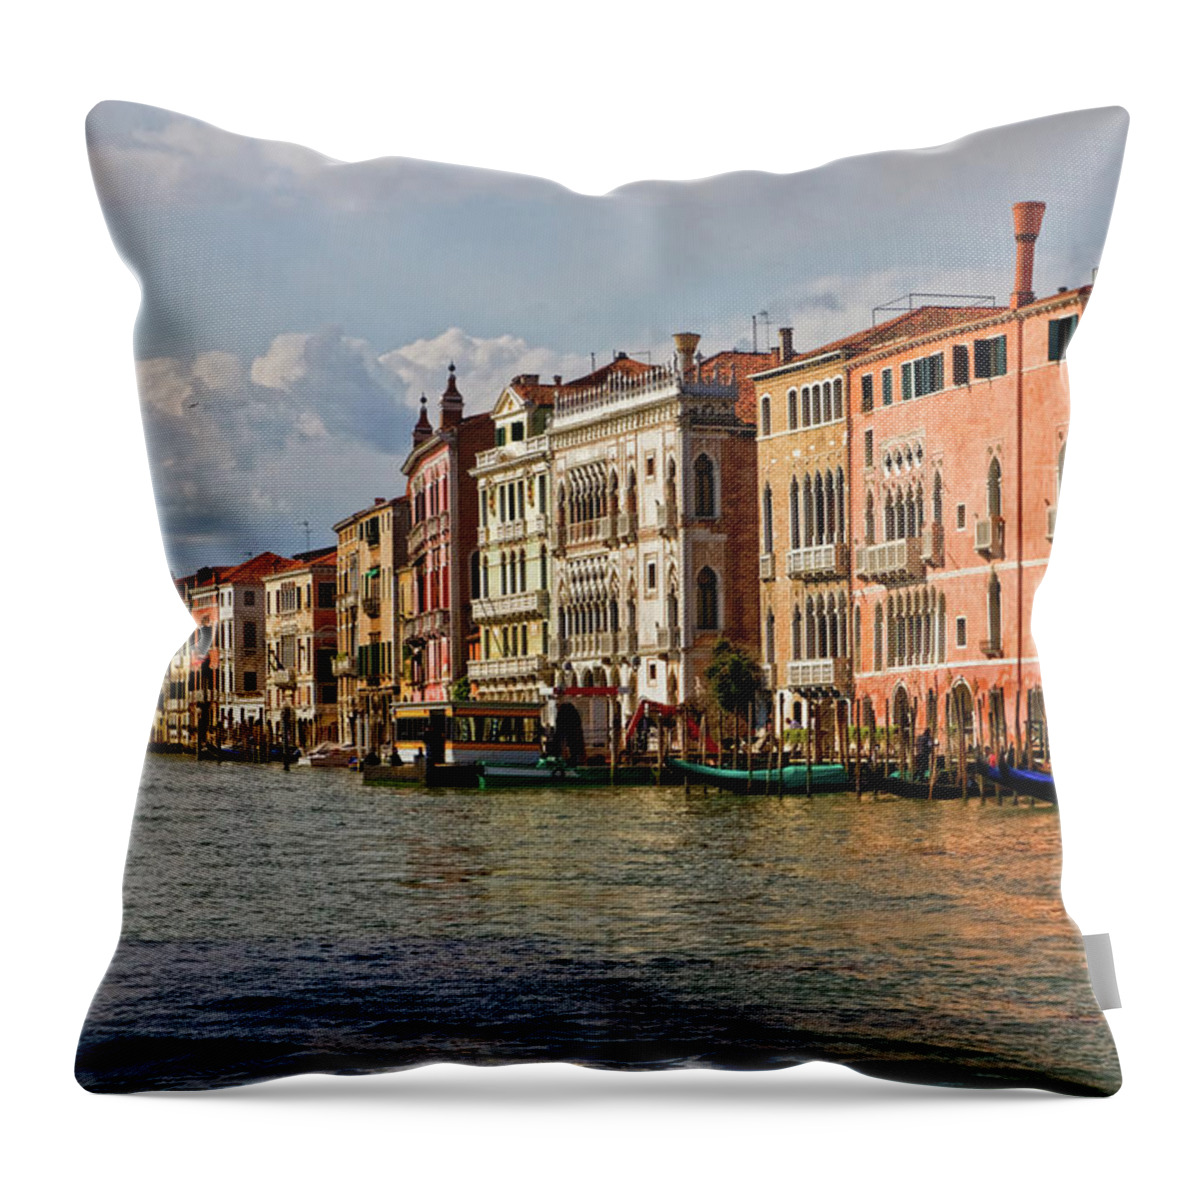 Outdoors Throw Pillow featuring the photograph Gondolas In Venice, Italy by Ary6